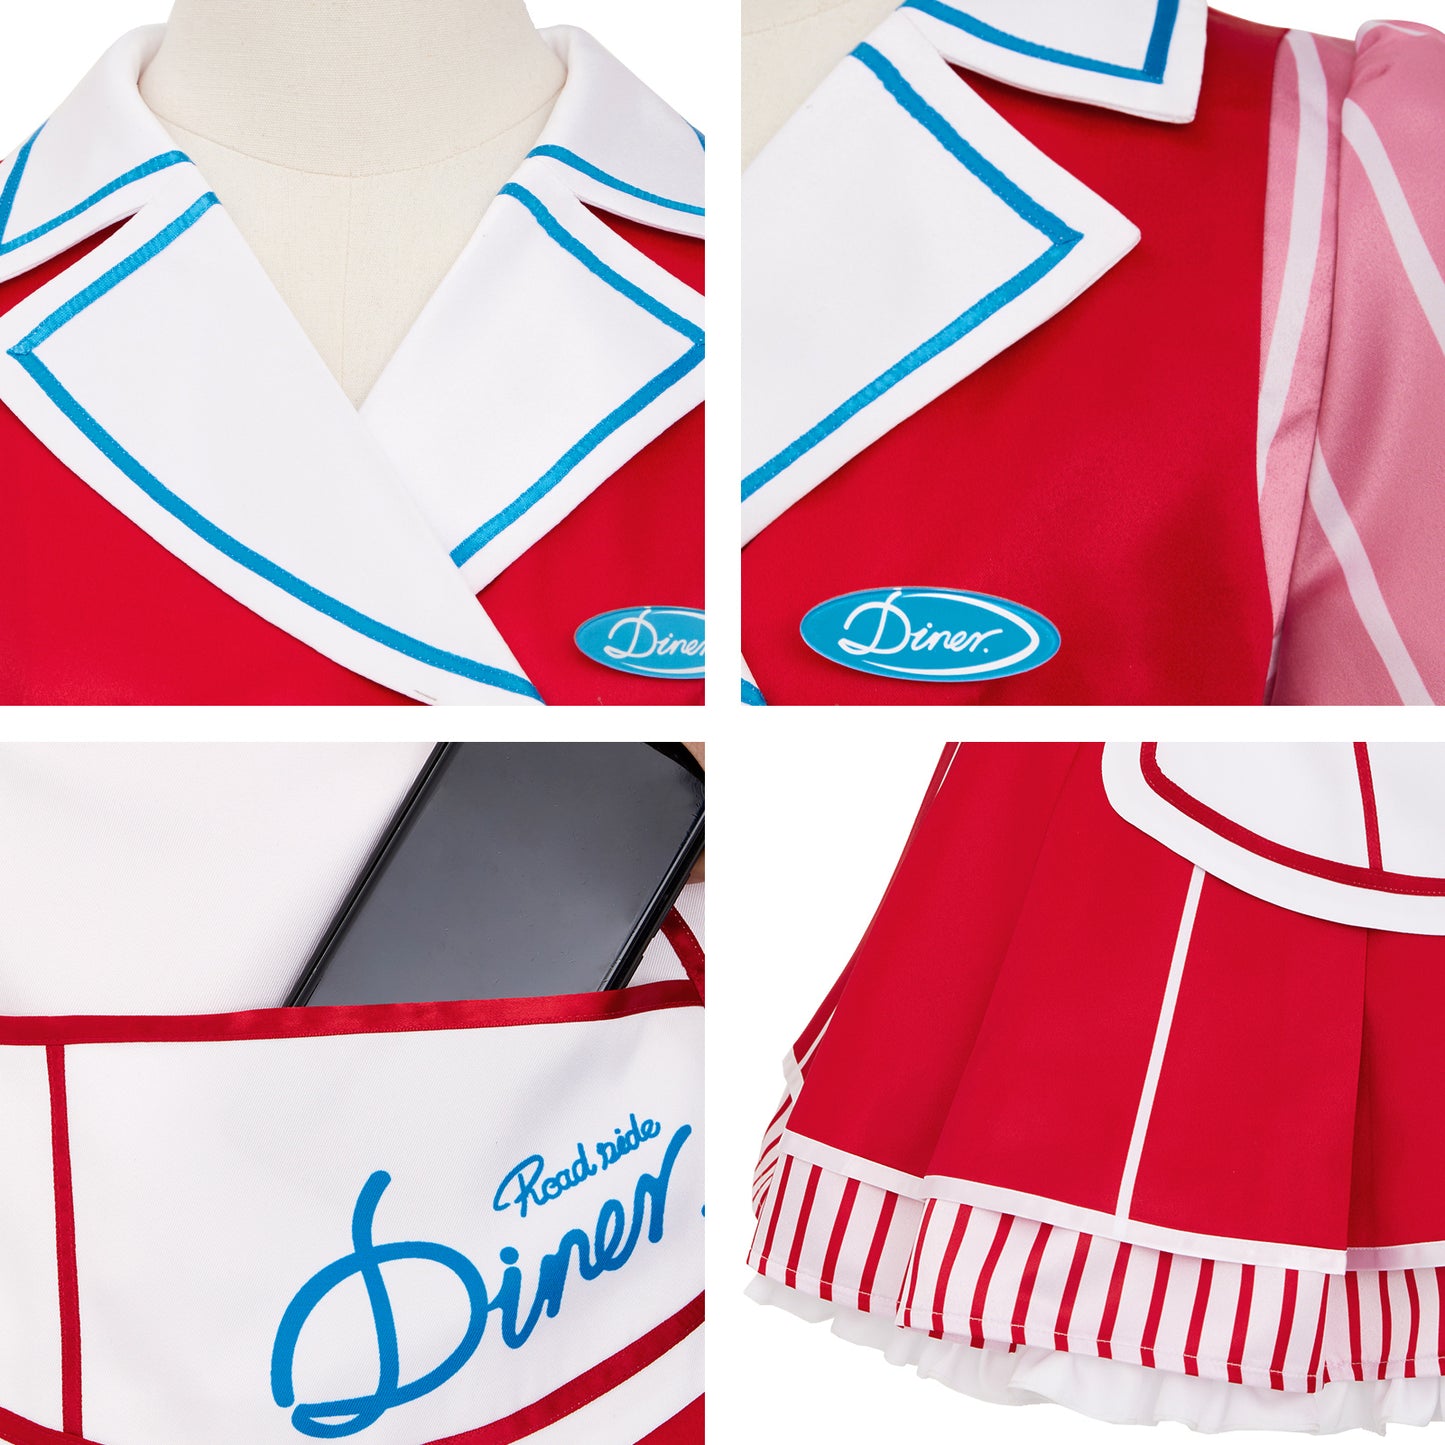 Project Sekai Colorful Stage Welcome to diner!! Cosplay Costume Tenma Saki Red Dress Skirt Full Sets